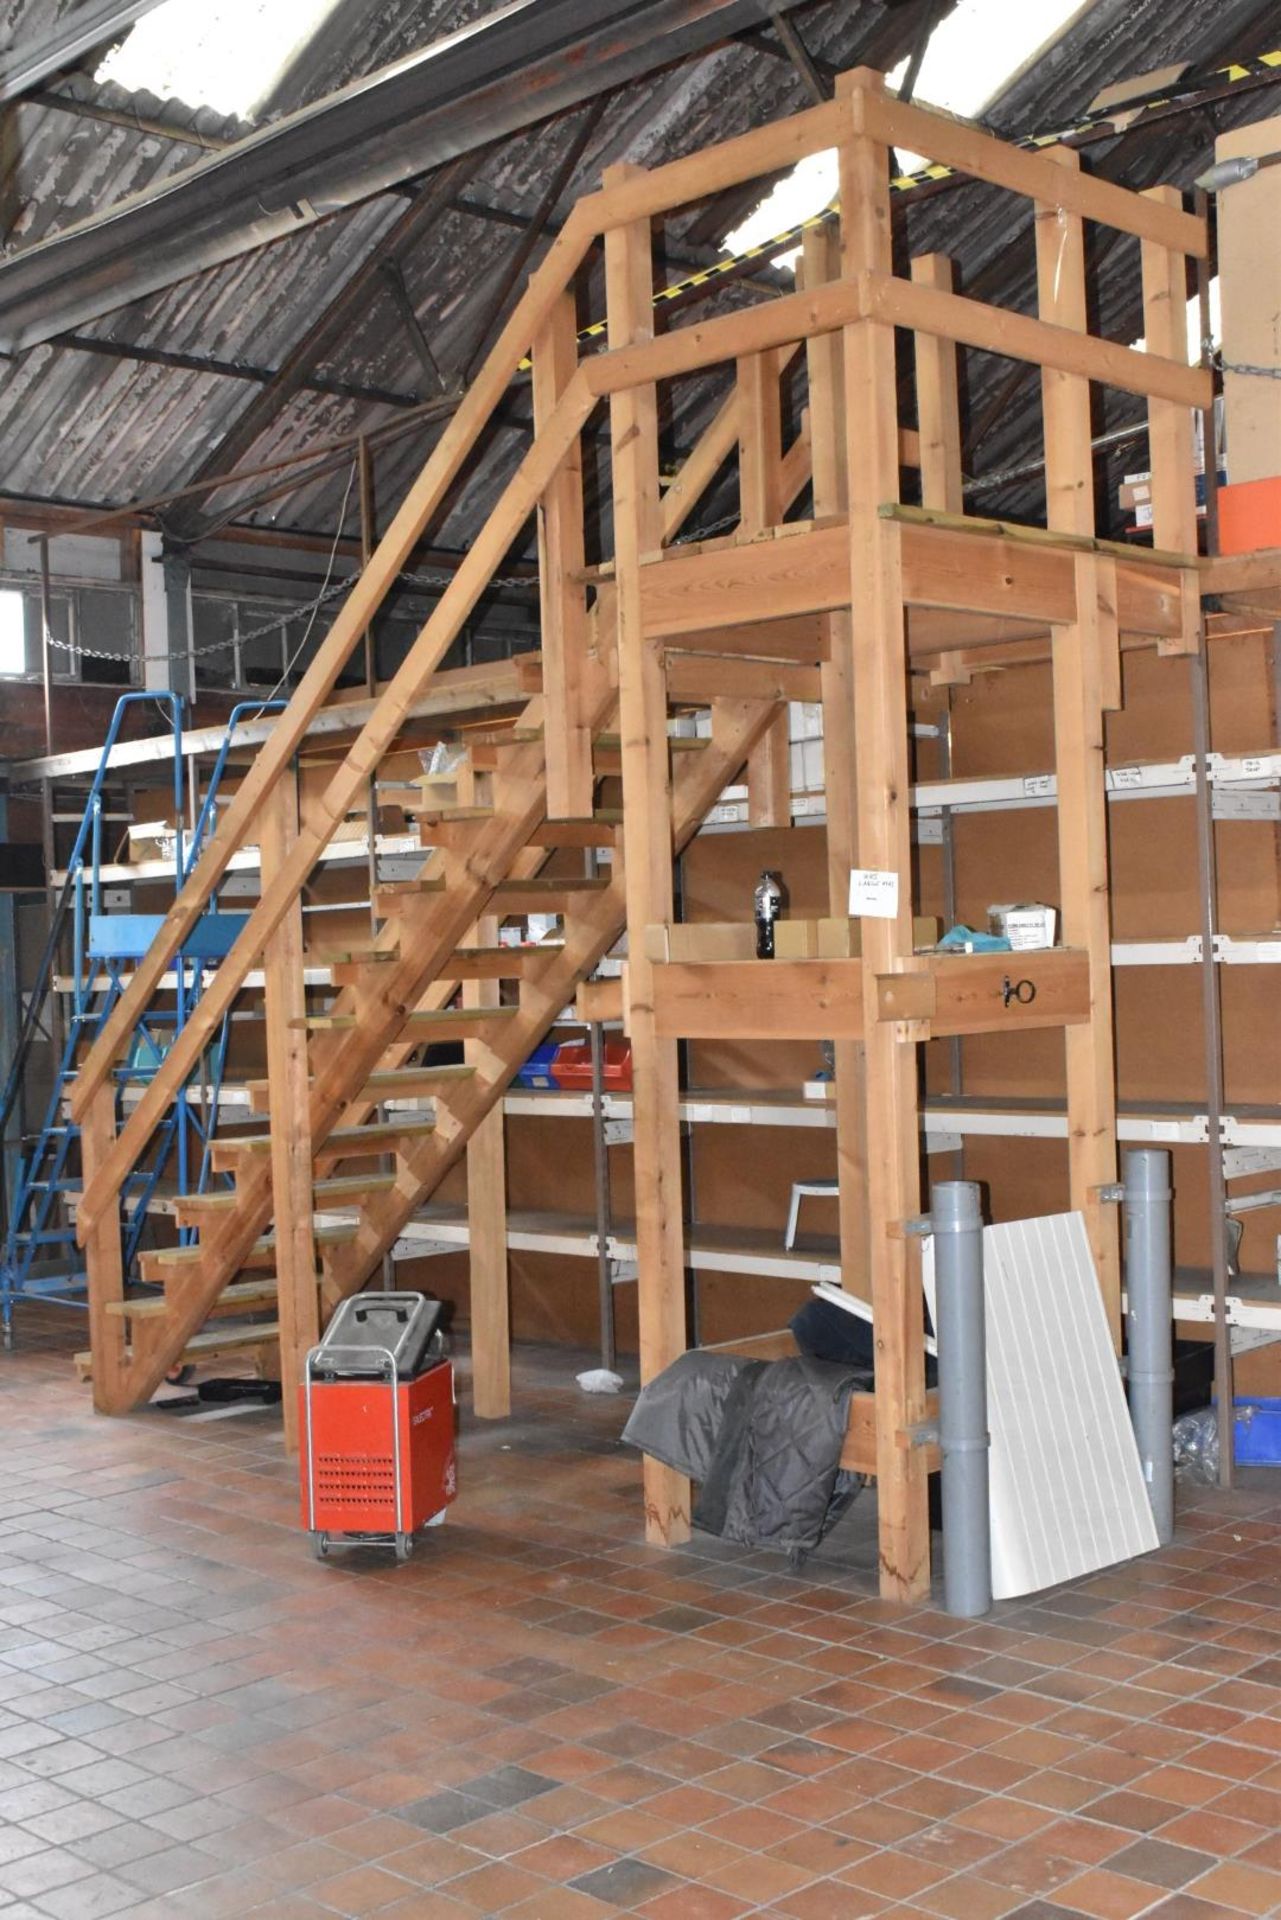 1 x Mezzanine Floor Over a Large Collection of Shelving With Timber Staircase - Size: 3m x 12m x 9m - Image 20 of 38